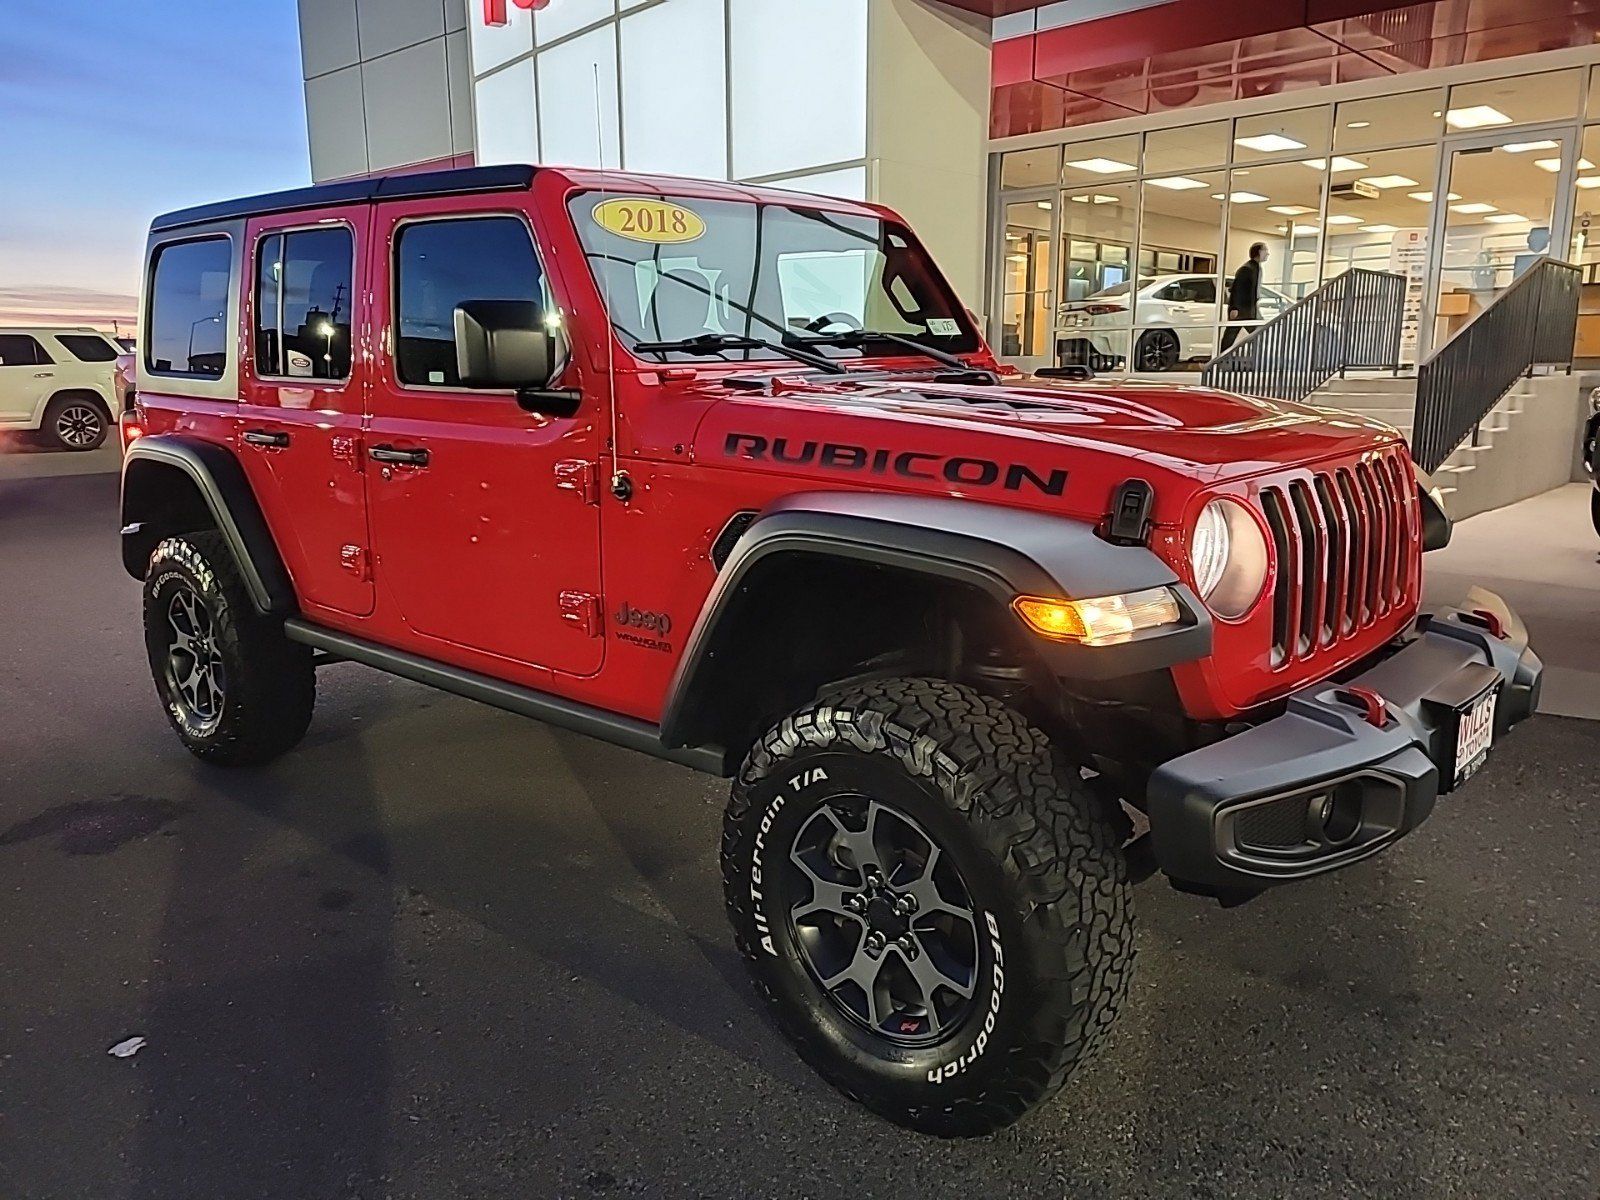 2018 - Jeep - Wrangler Unlimited - $40,999